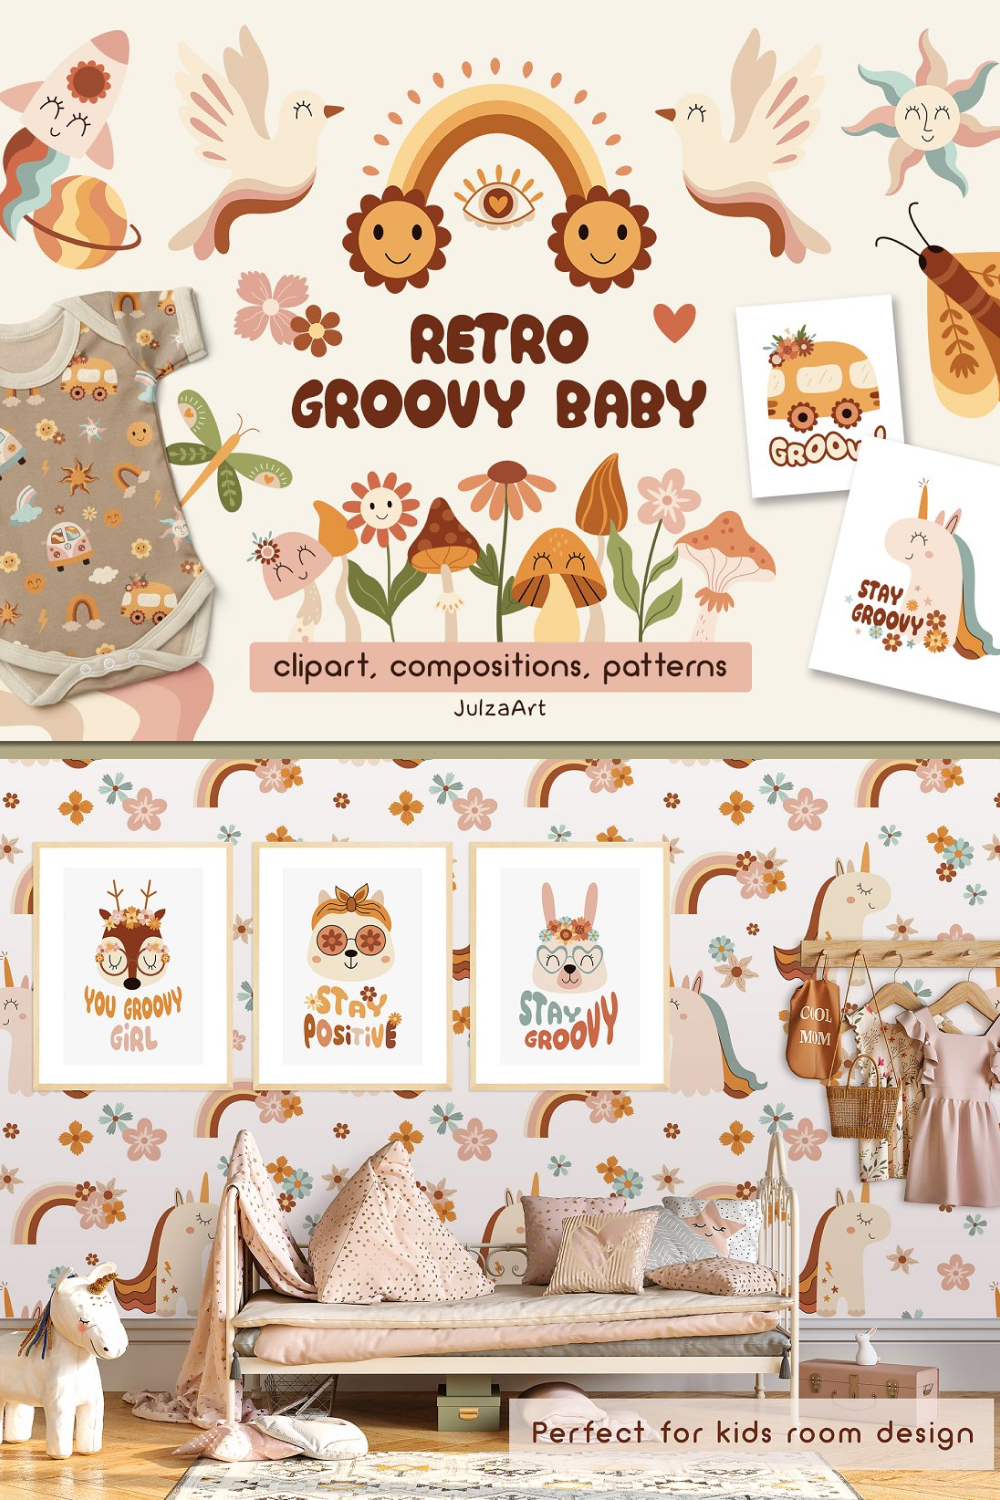 Retro groovy baby collection of pinterest.